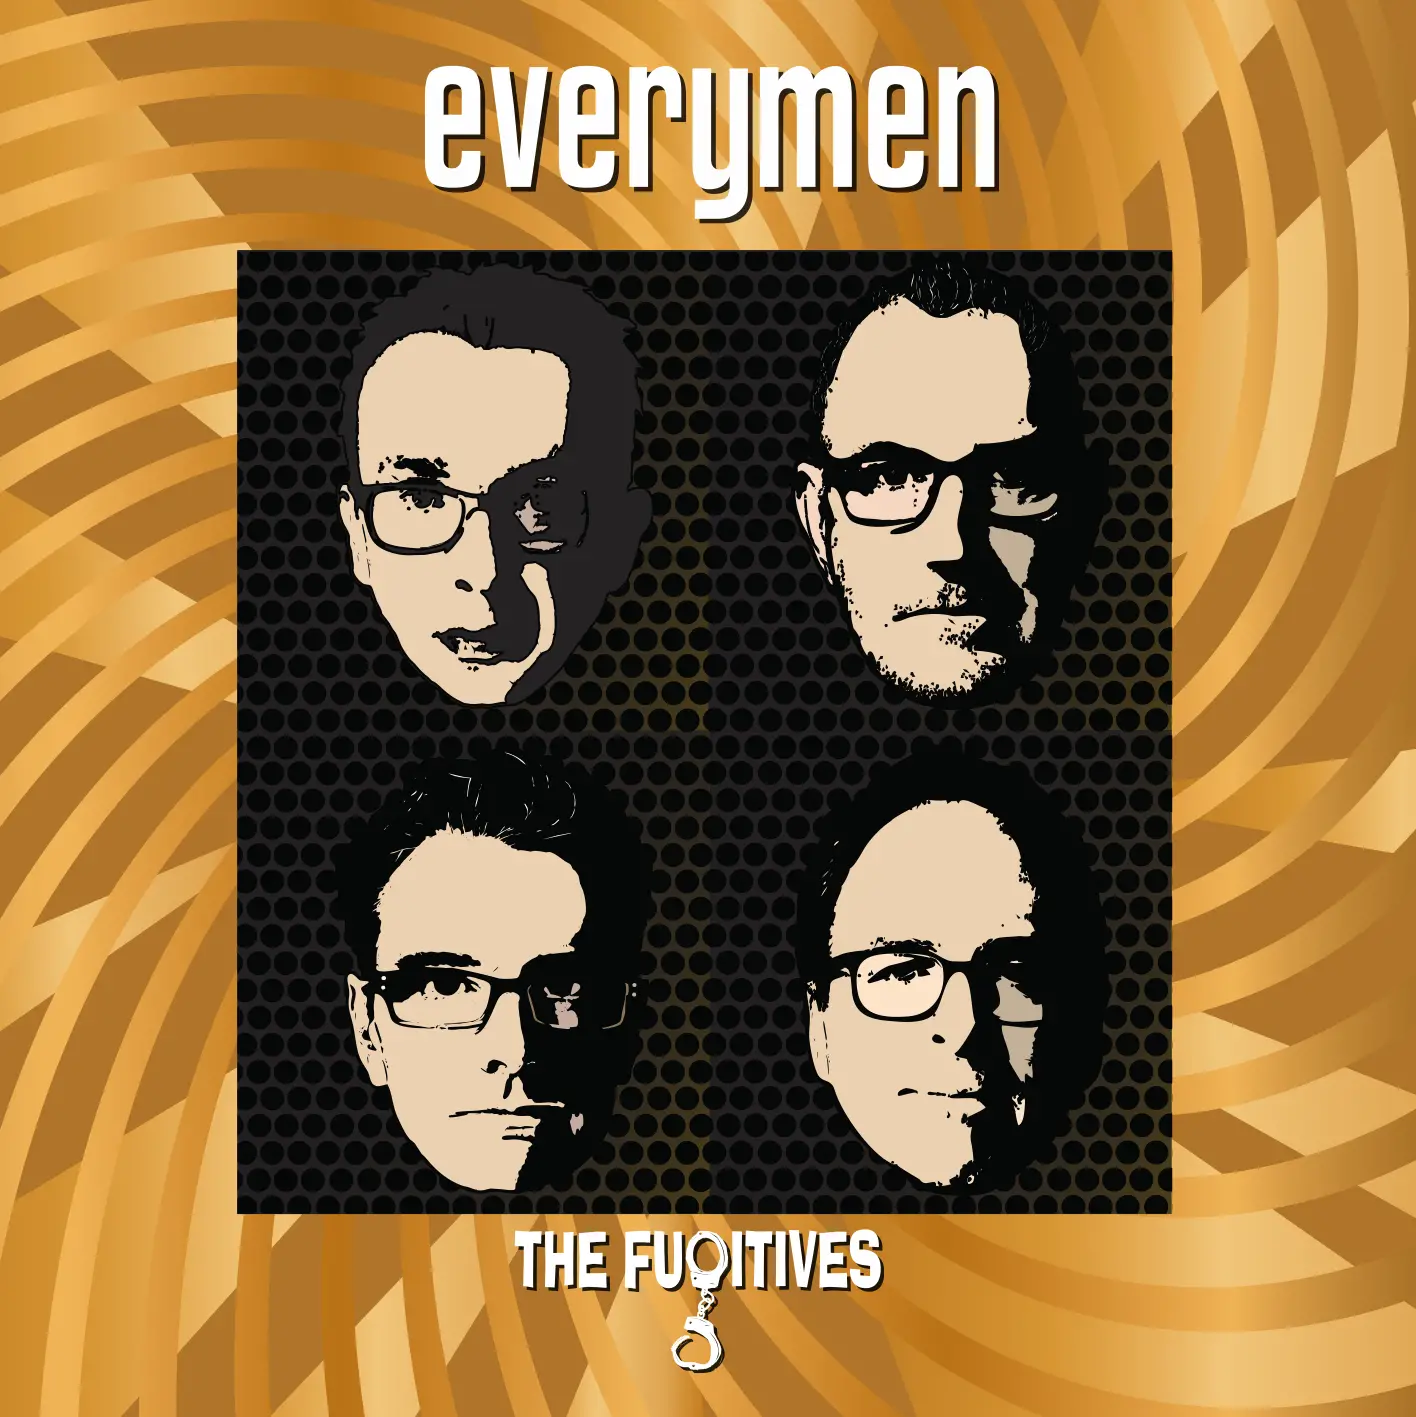 The Fugitives - 'Everymen' Review | Opinions | LIVING LIFE FEARLESS